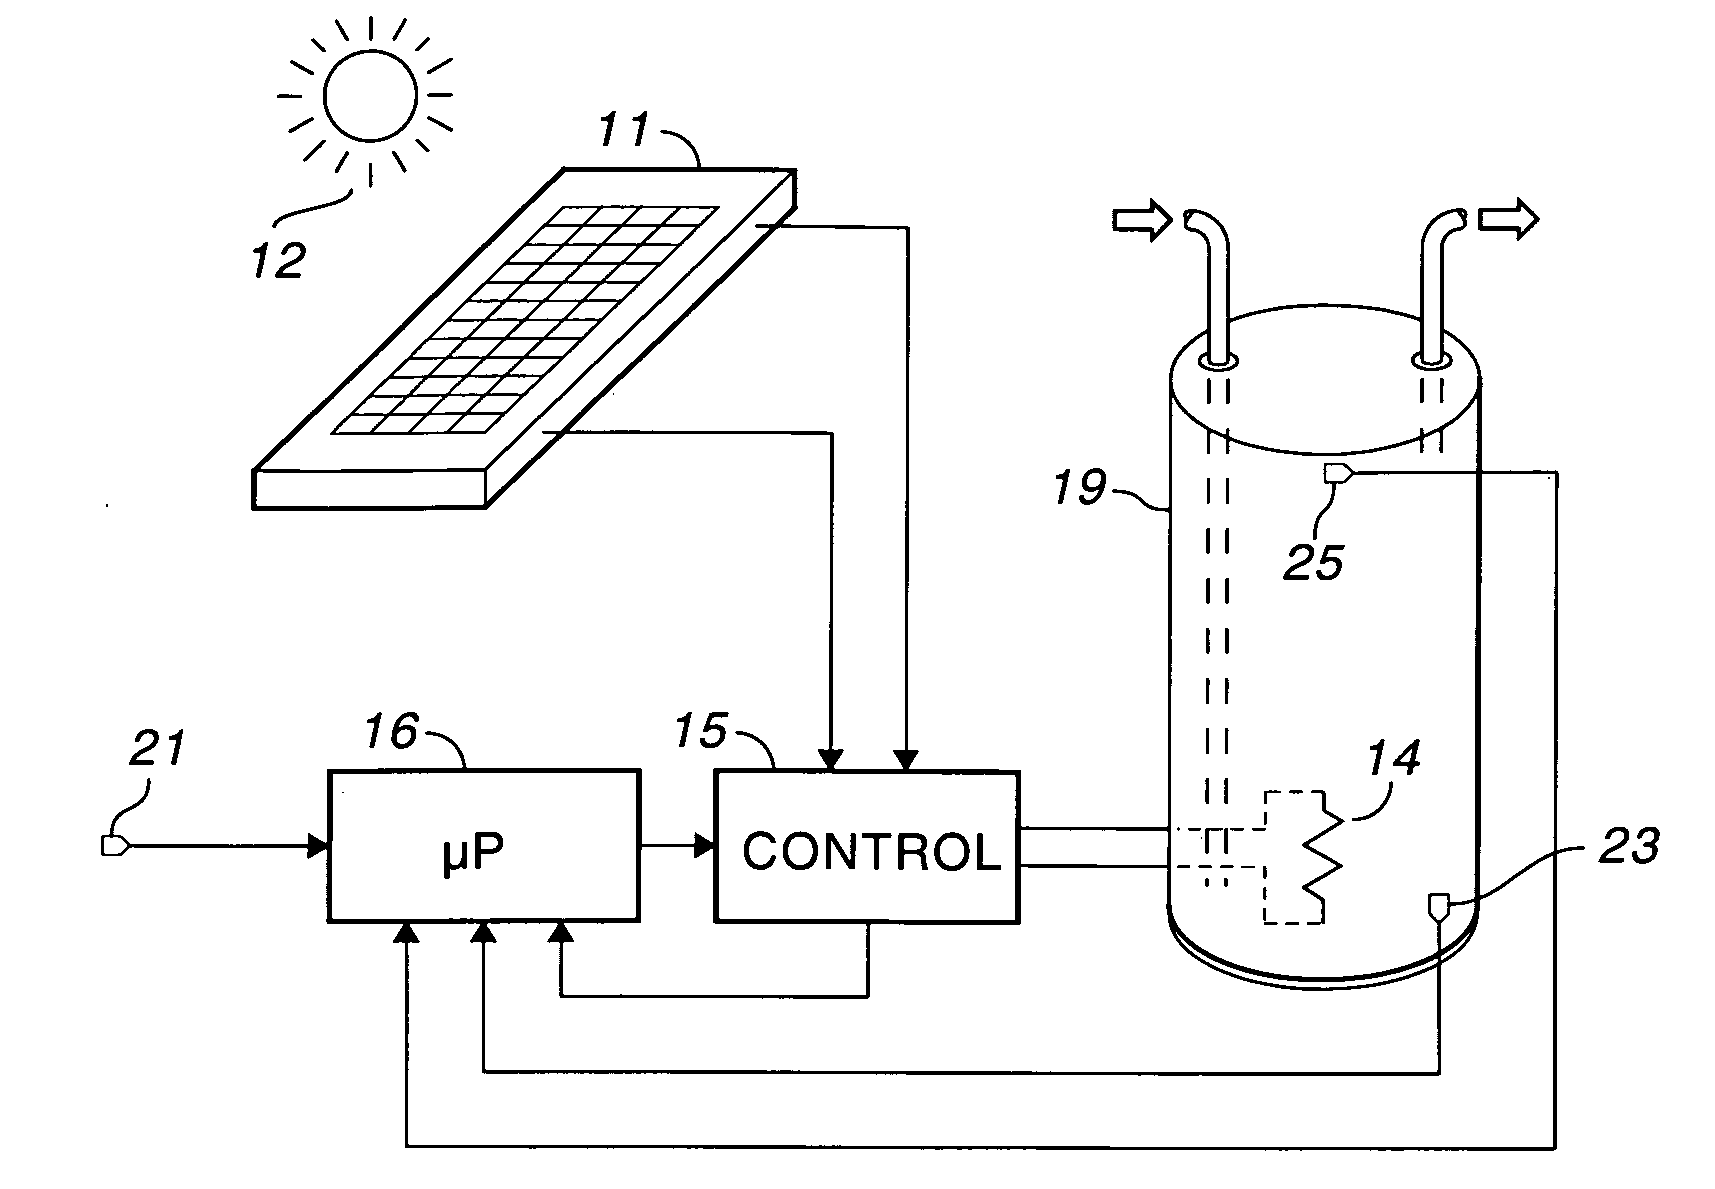 PV water heater with adaptive control